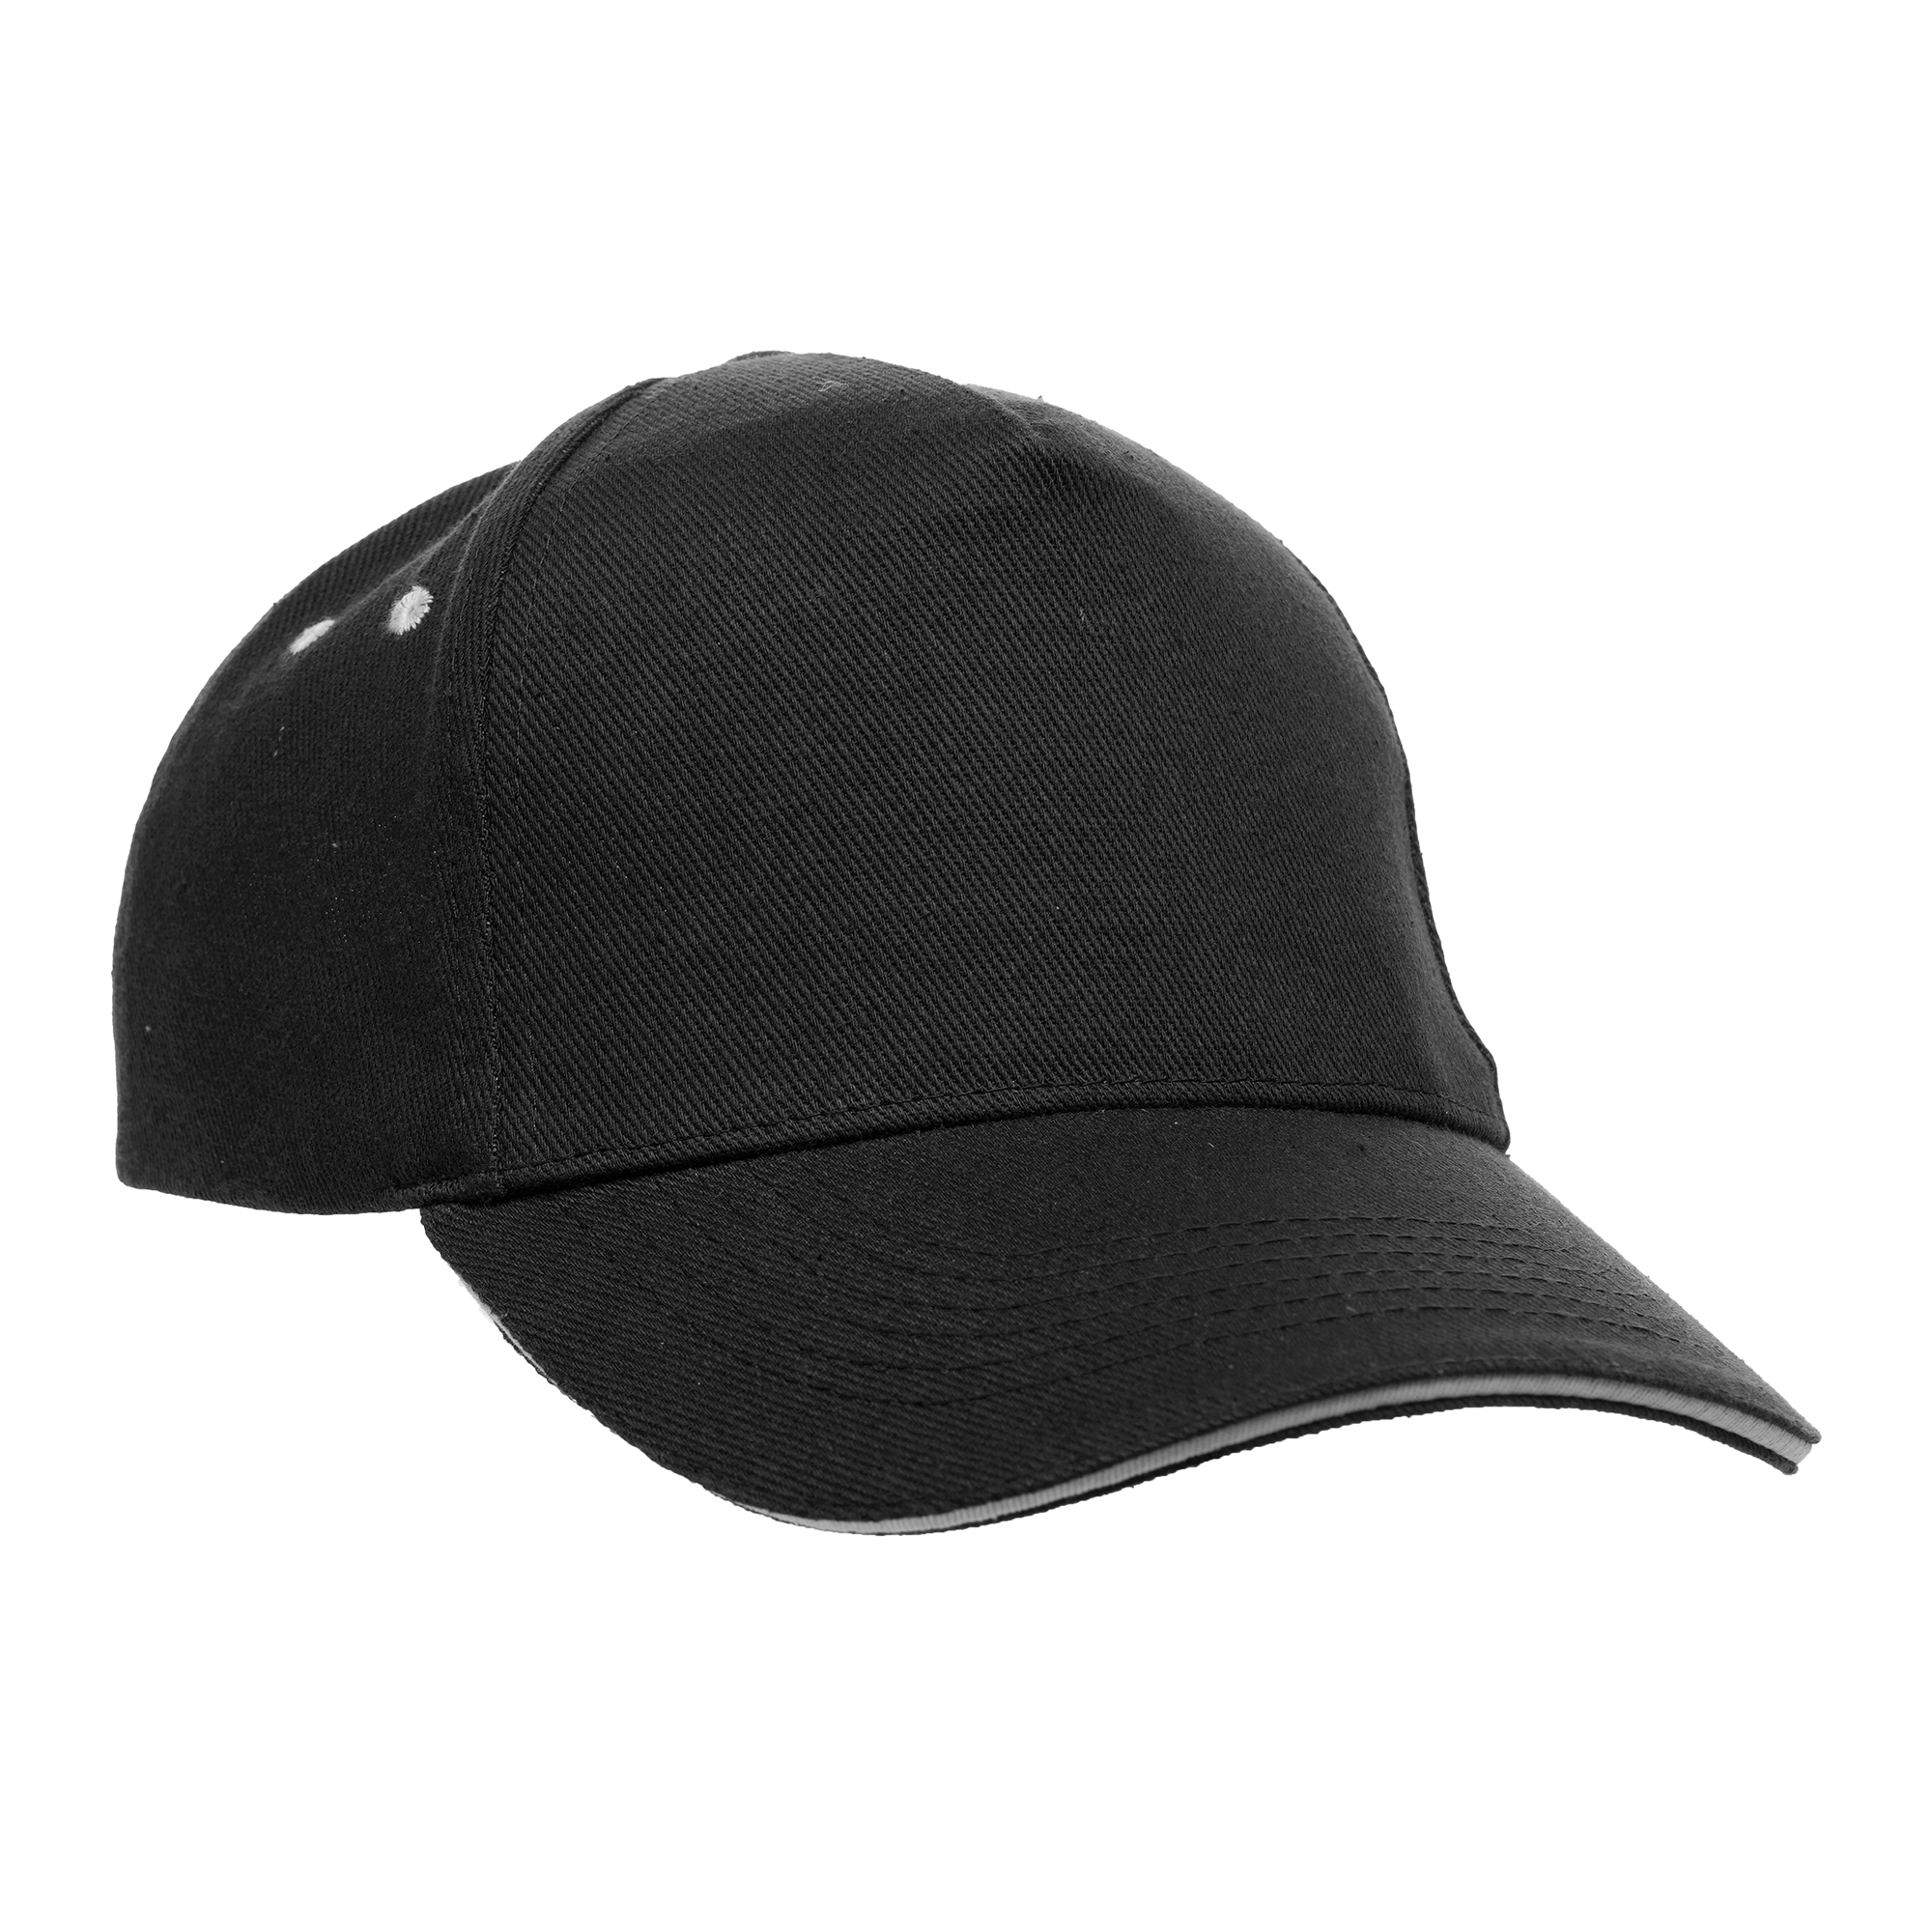 Made with 100% cotton this 5-panel cap includes a white sandwich peak design, white stitched eyelet detail, with a Rip-Strip™ size adjuster to ensure a comfortable and secure fit for everyone. With a variety of colours to choose from, customise this one size adults cap to perfectly match your brands identity. Available in a variety of colours